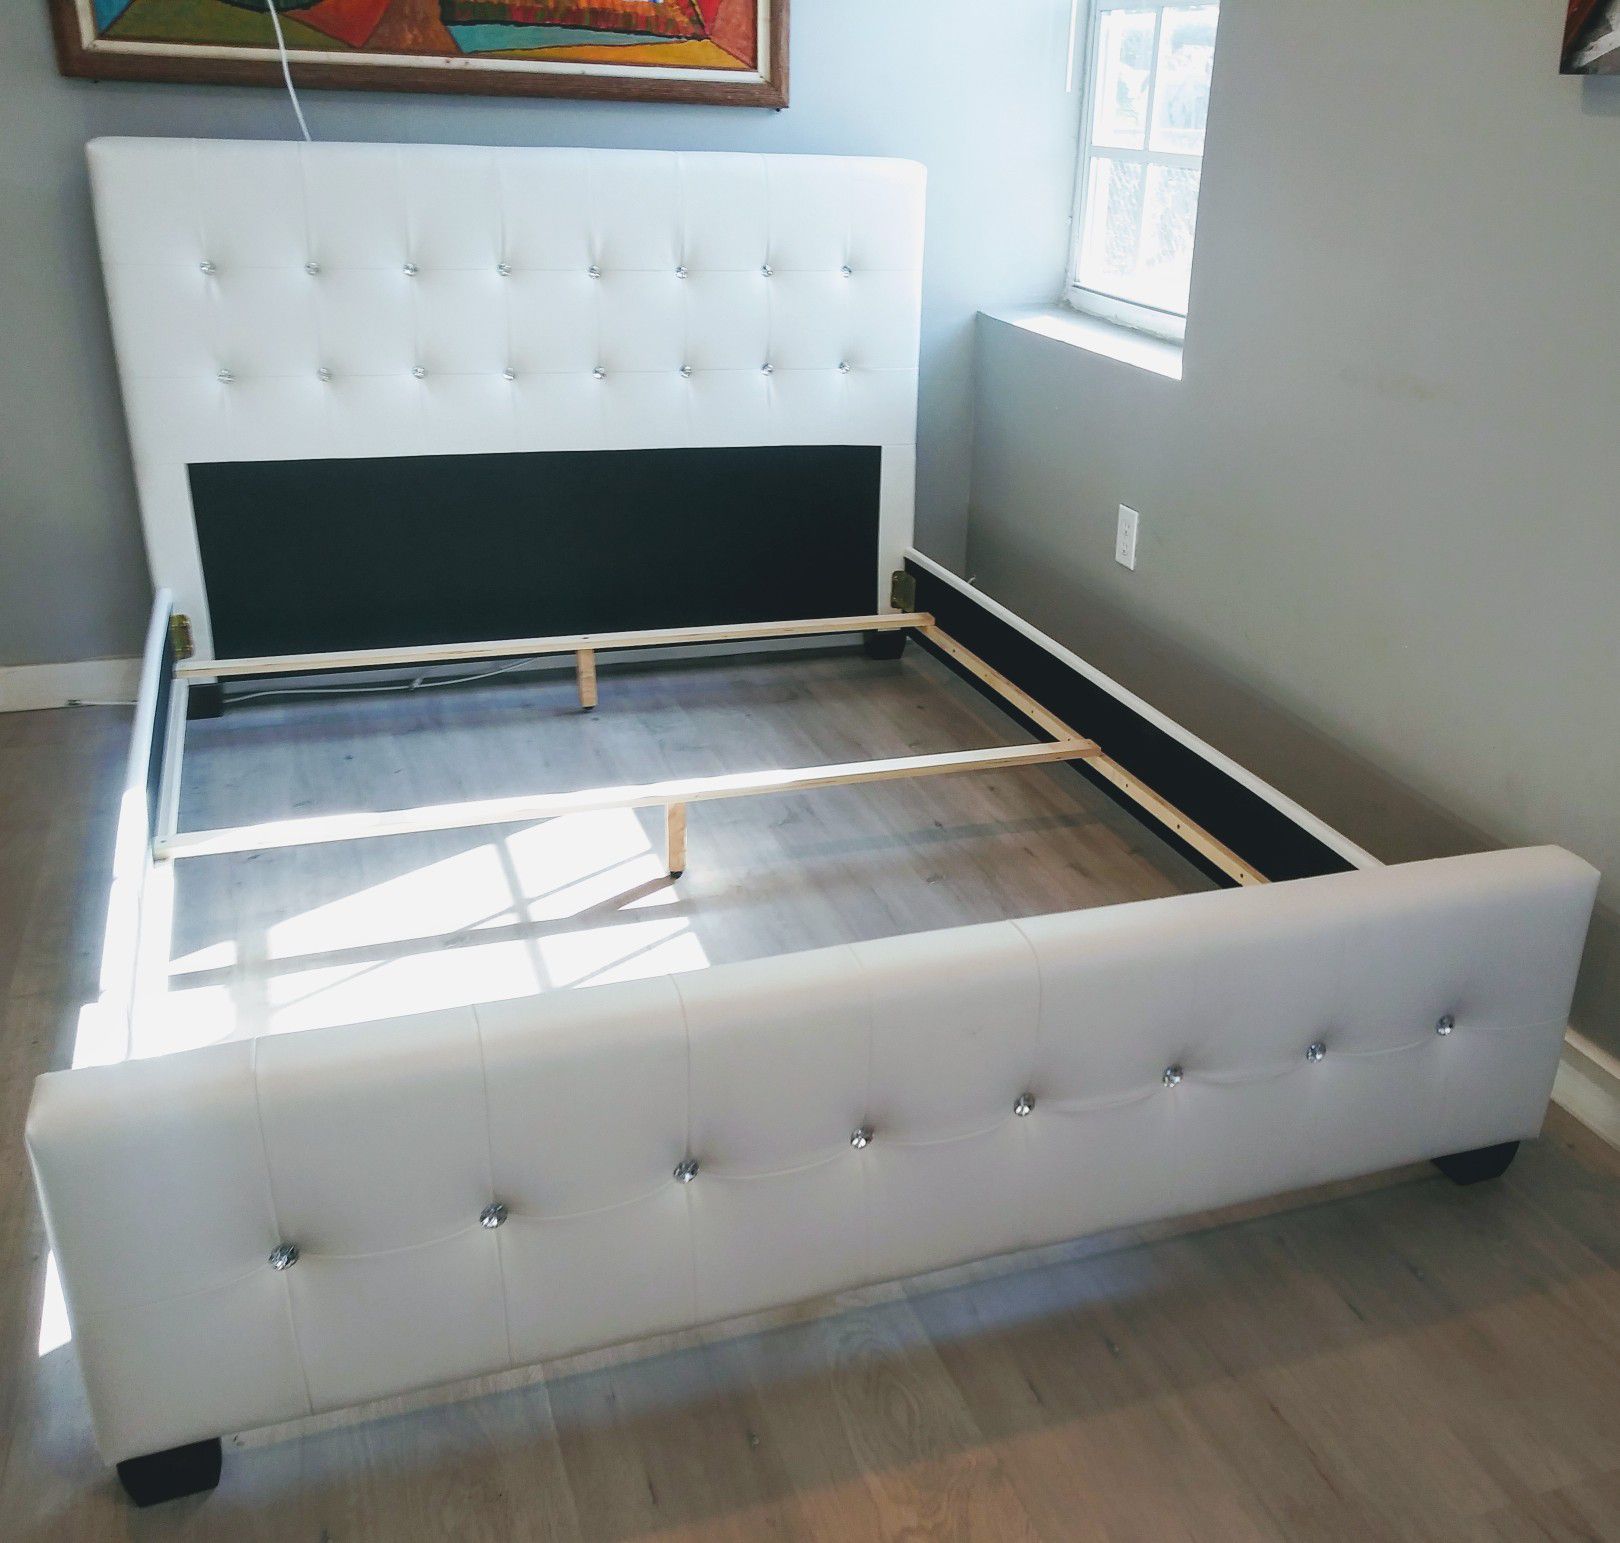 $289 white Queen bed frame brand new free delivery same day